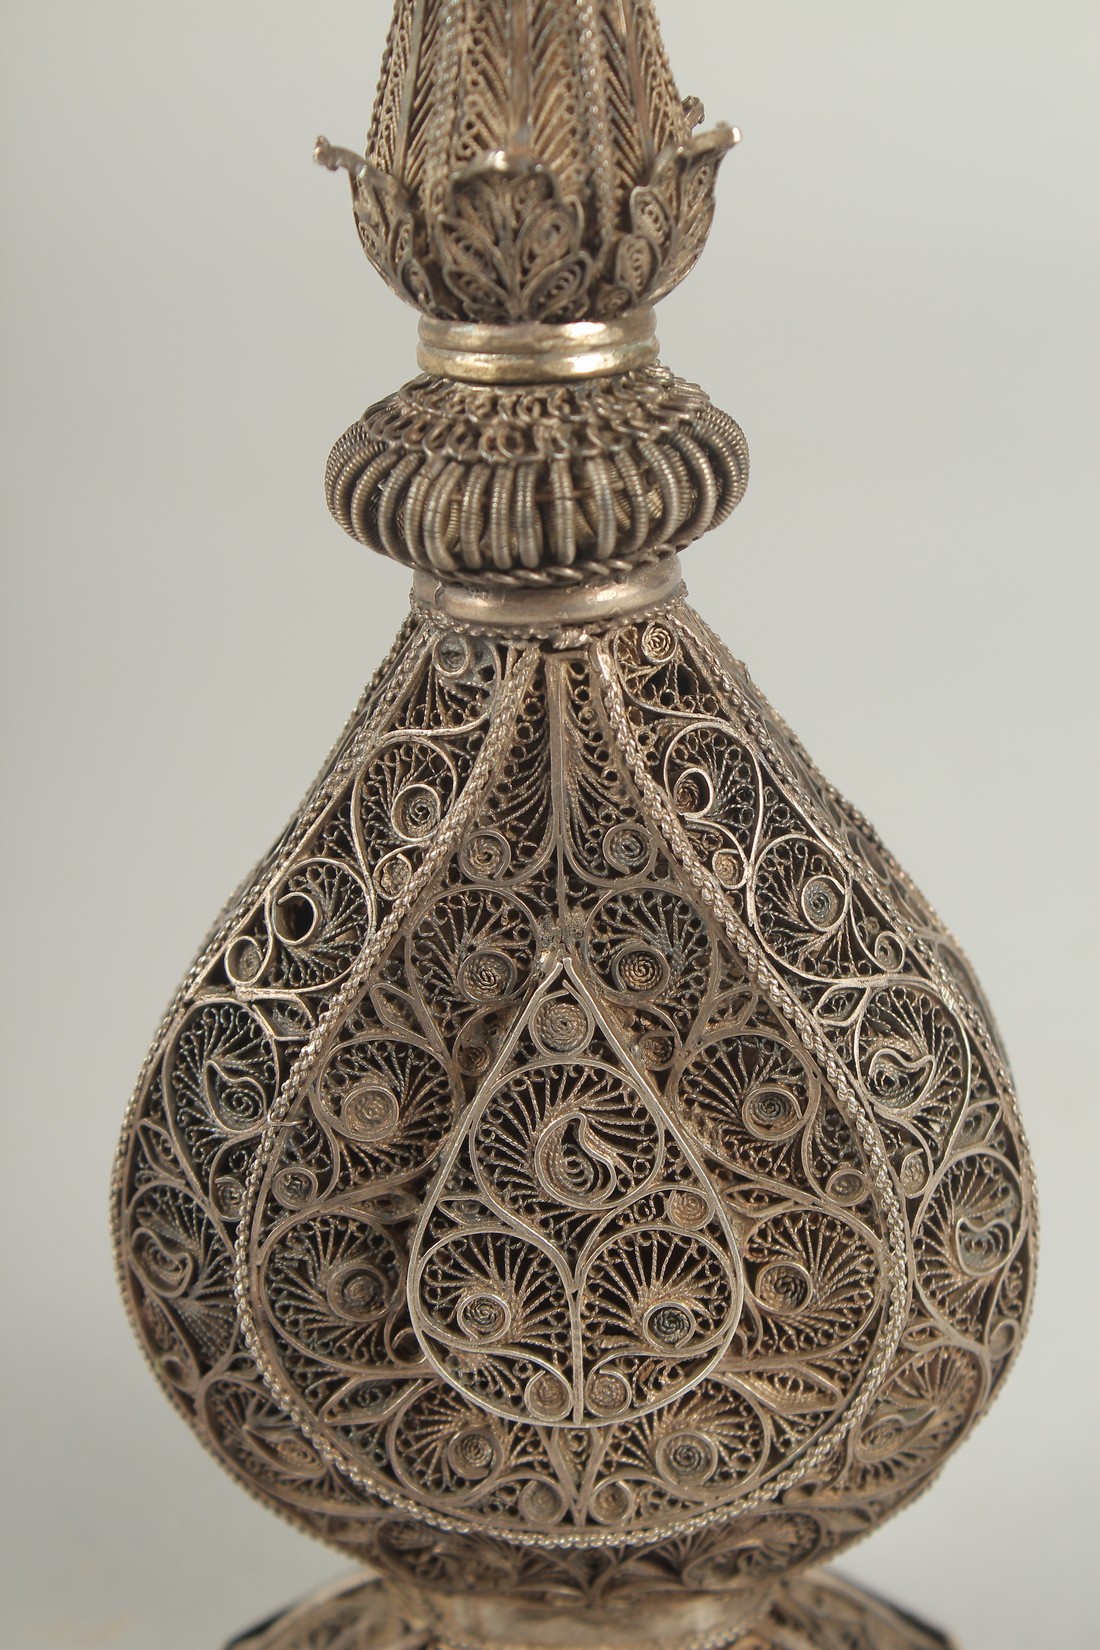 A FINE 19TH CENTURY INDIAN SILVER FILIGREE ROSEWATER SPRINKLER, 27cm high. - Image 7 of 10